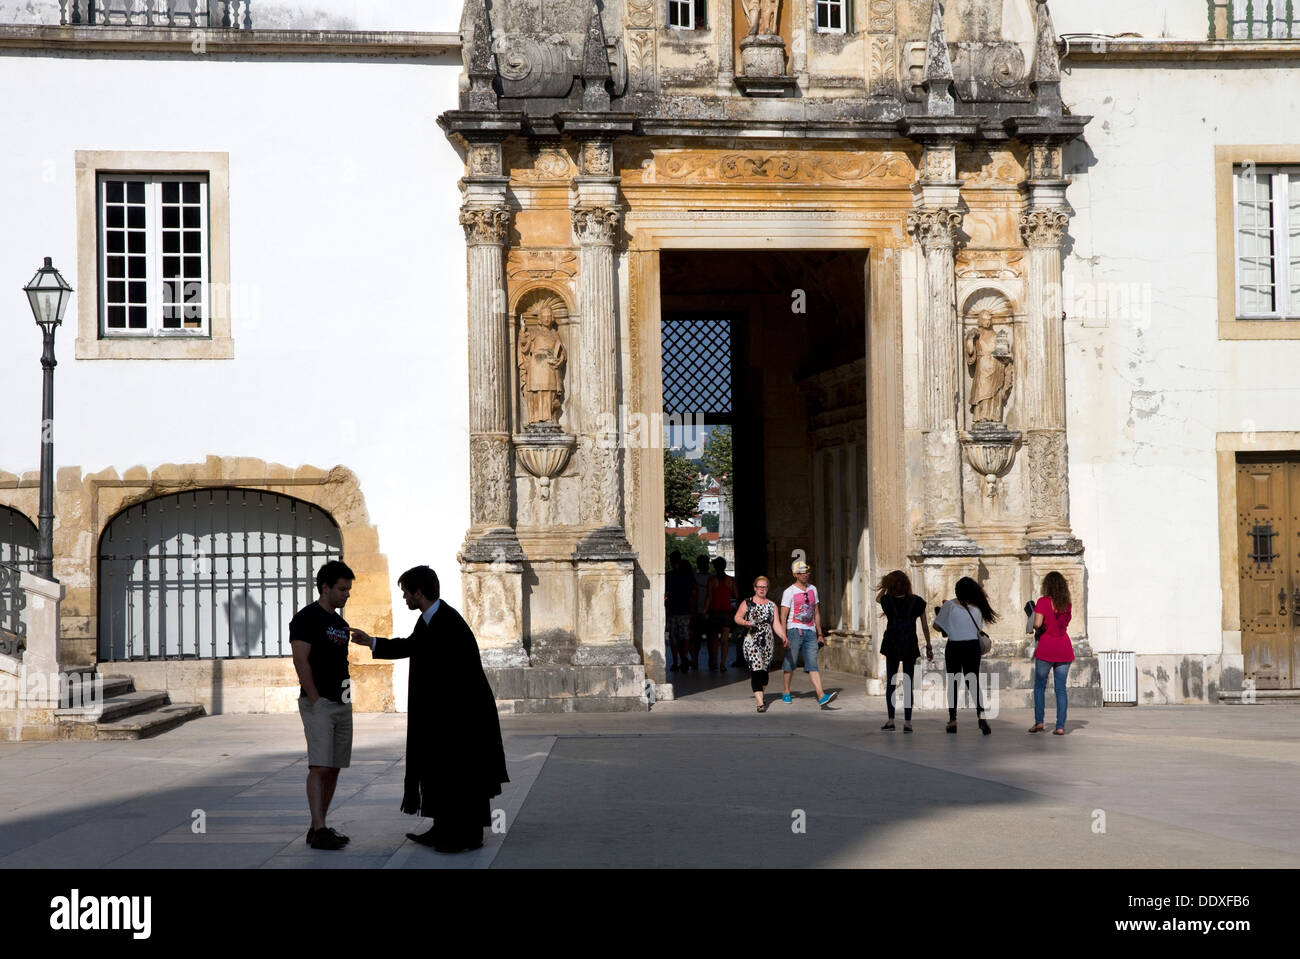 Entrance gate ( Porta Ferrea) and Courtyard of the old University of Coimbra, Coimbra, Portugal Stock Photo